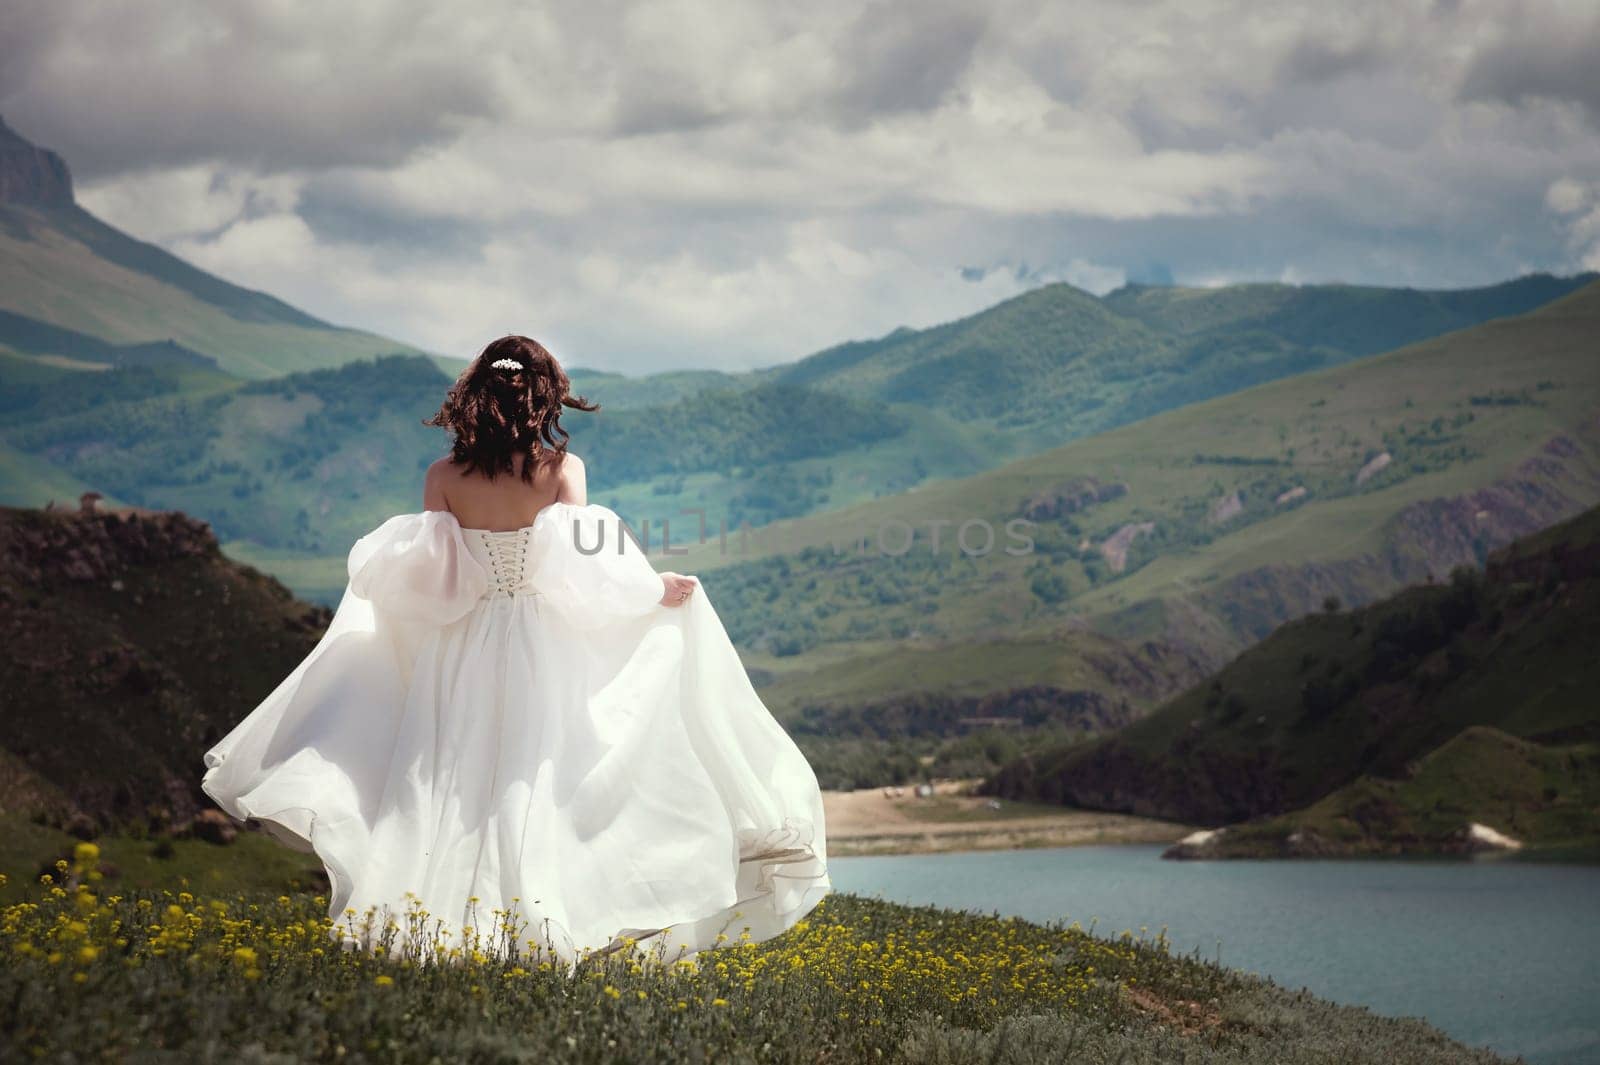 bride in a white wedding dress walks in the green mountains on the grass, in the background there are mountains and a lake by yanik88